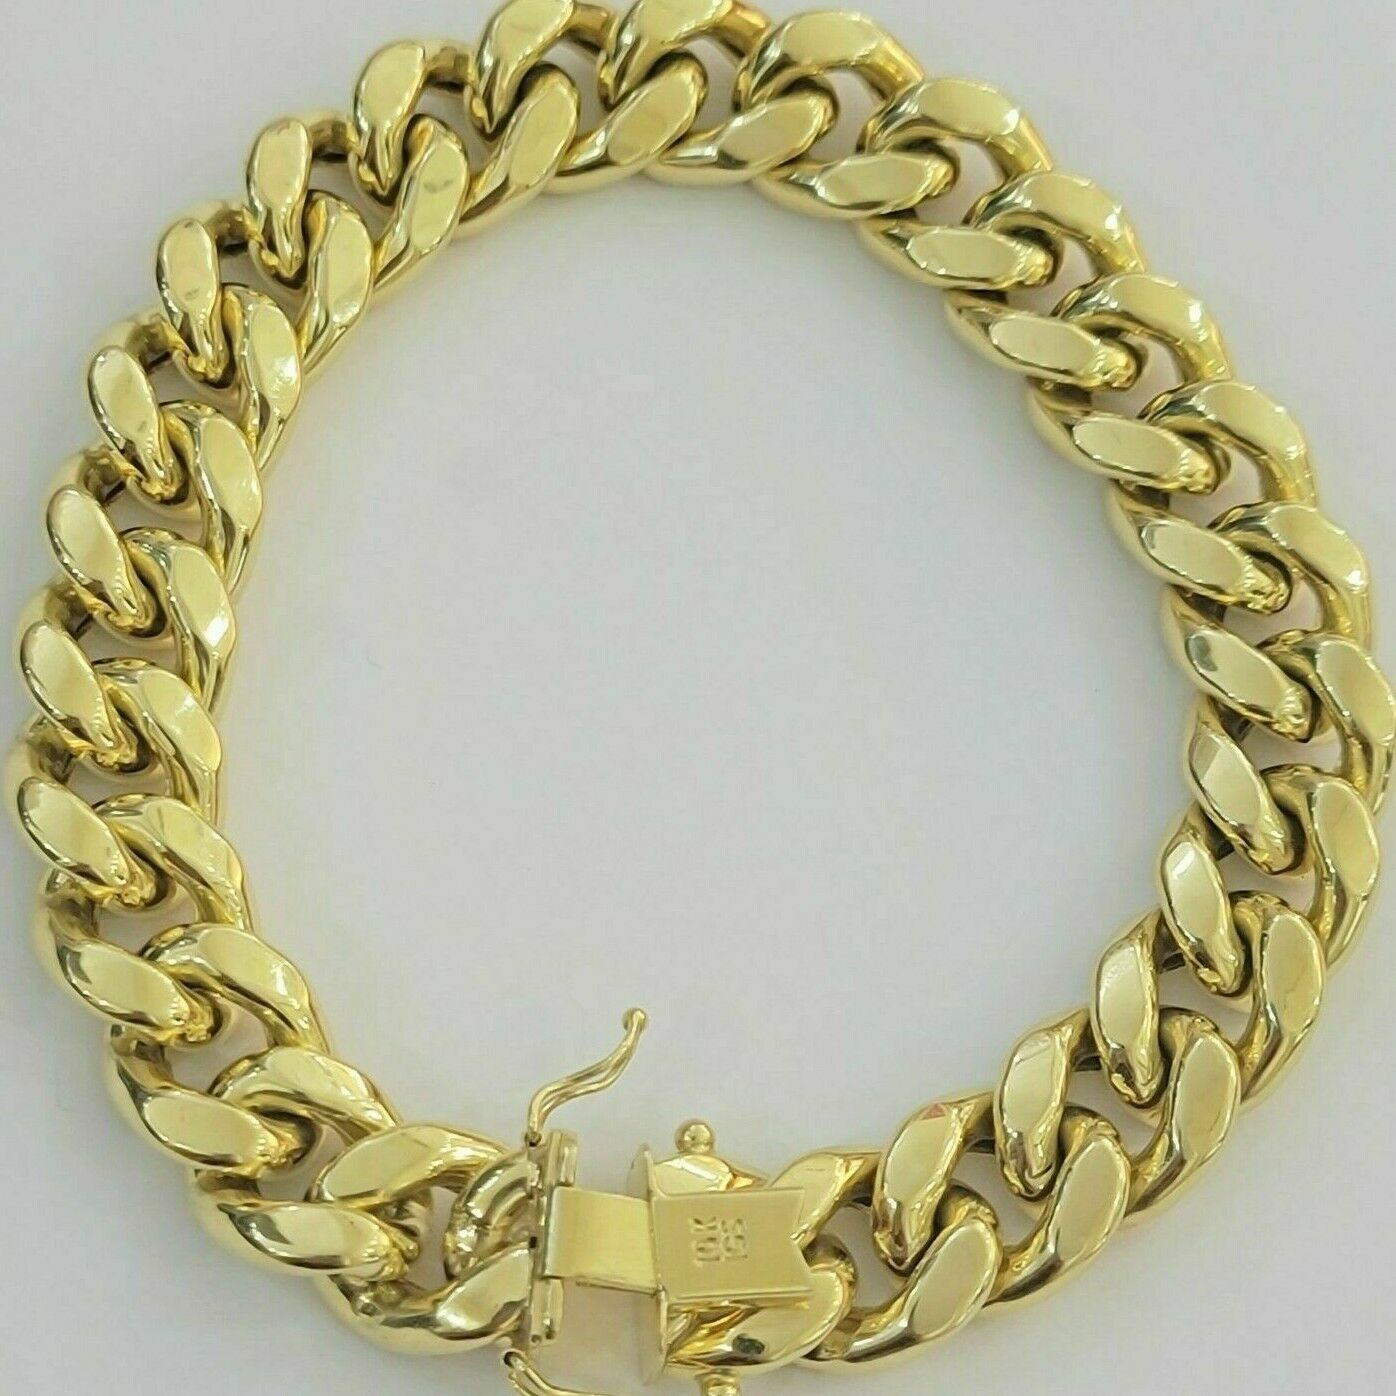 Real 10k Gold Mens Bracelet Miami Cuban Link 9" 15mm Box clasp Thick Strong 10kt